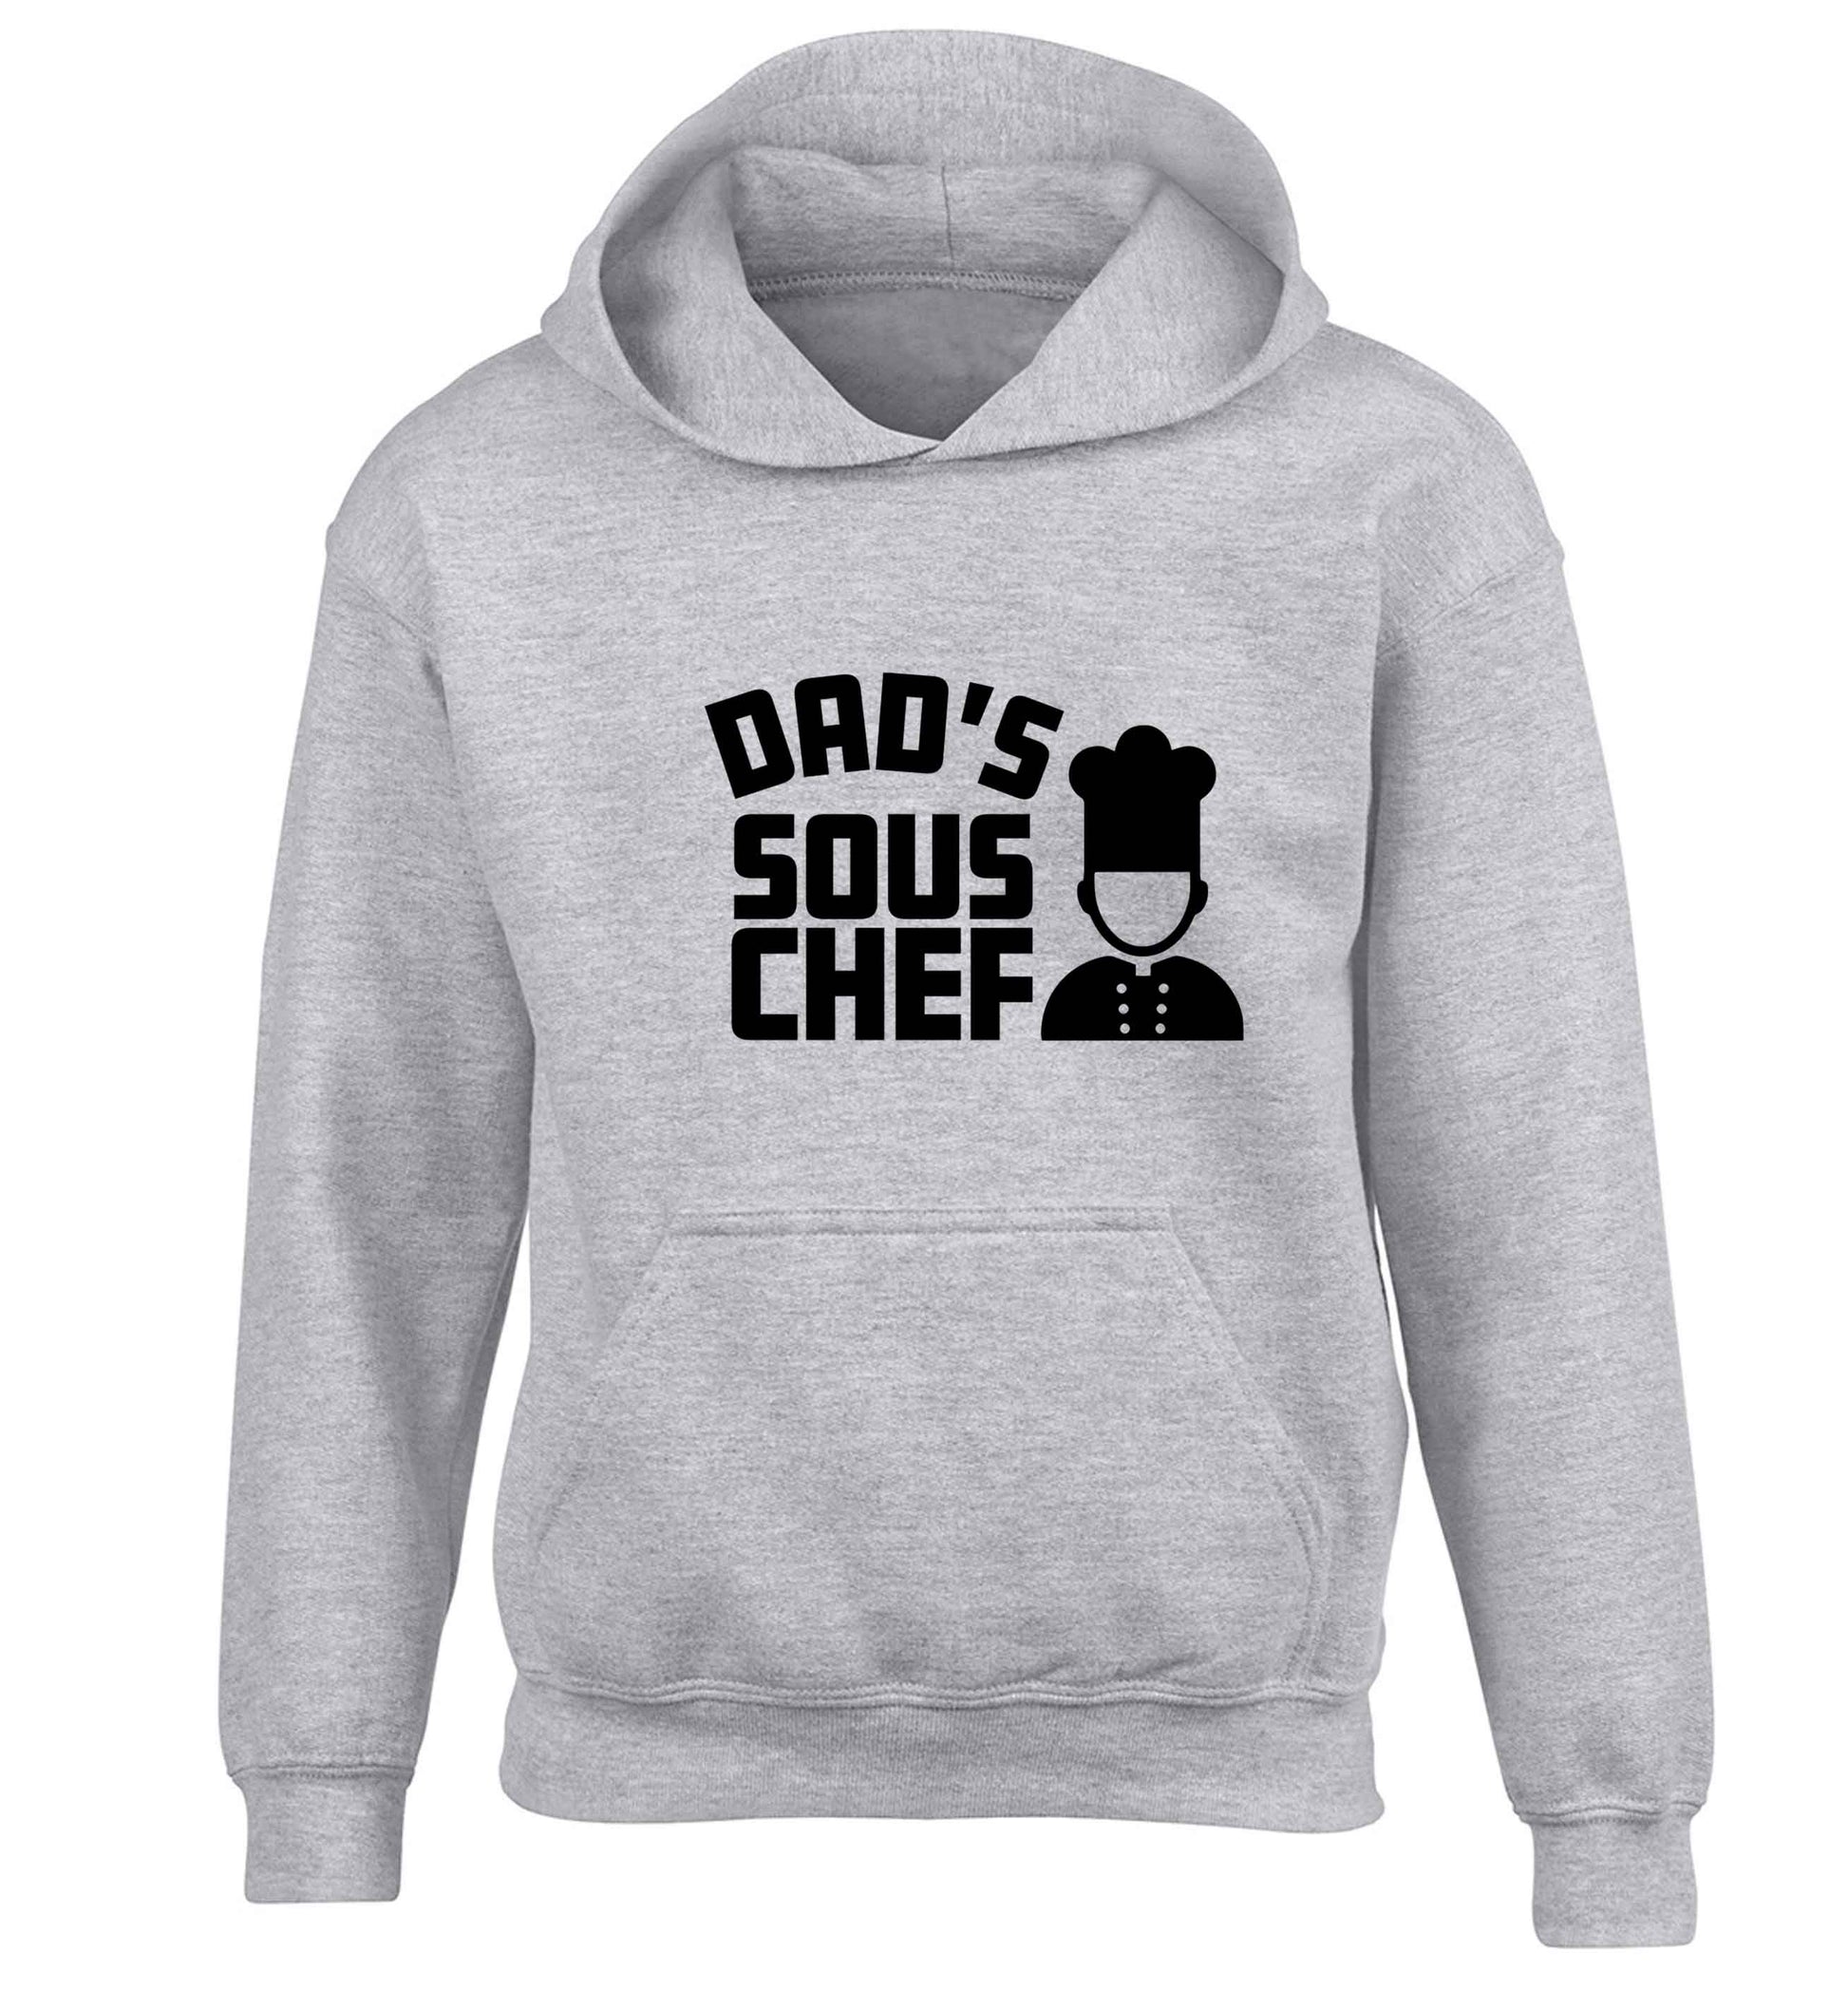 Dad's sous chef children's grey hoodie 12-13 Years